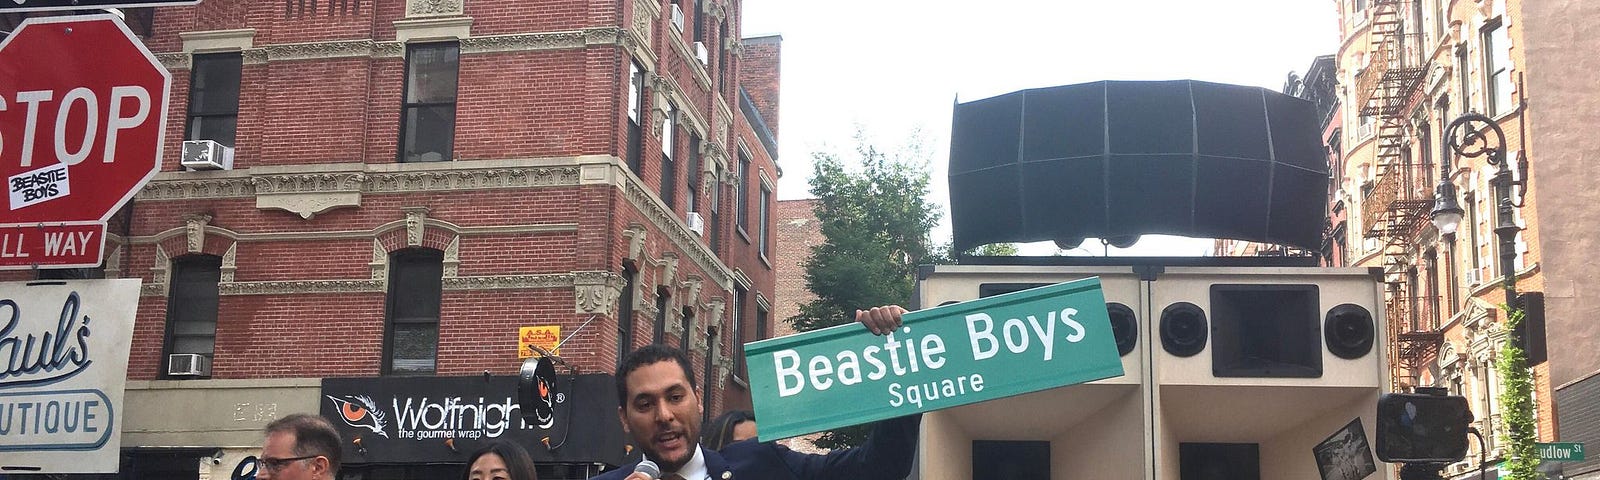 Beastie Boys Square sign, revealted